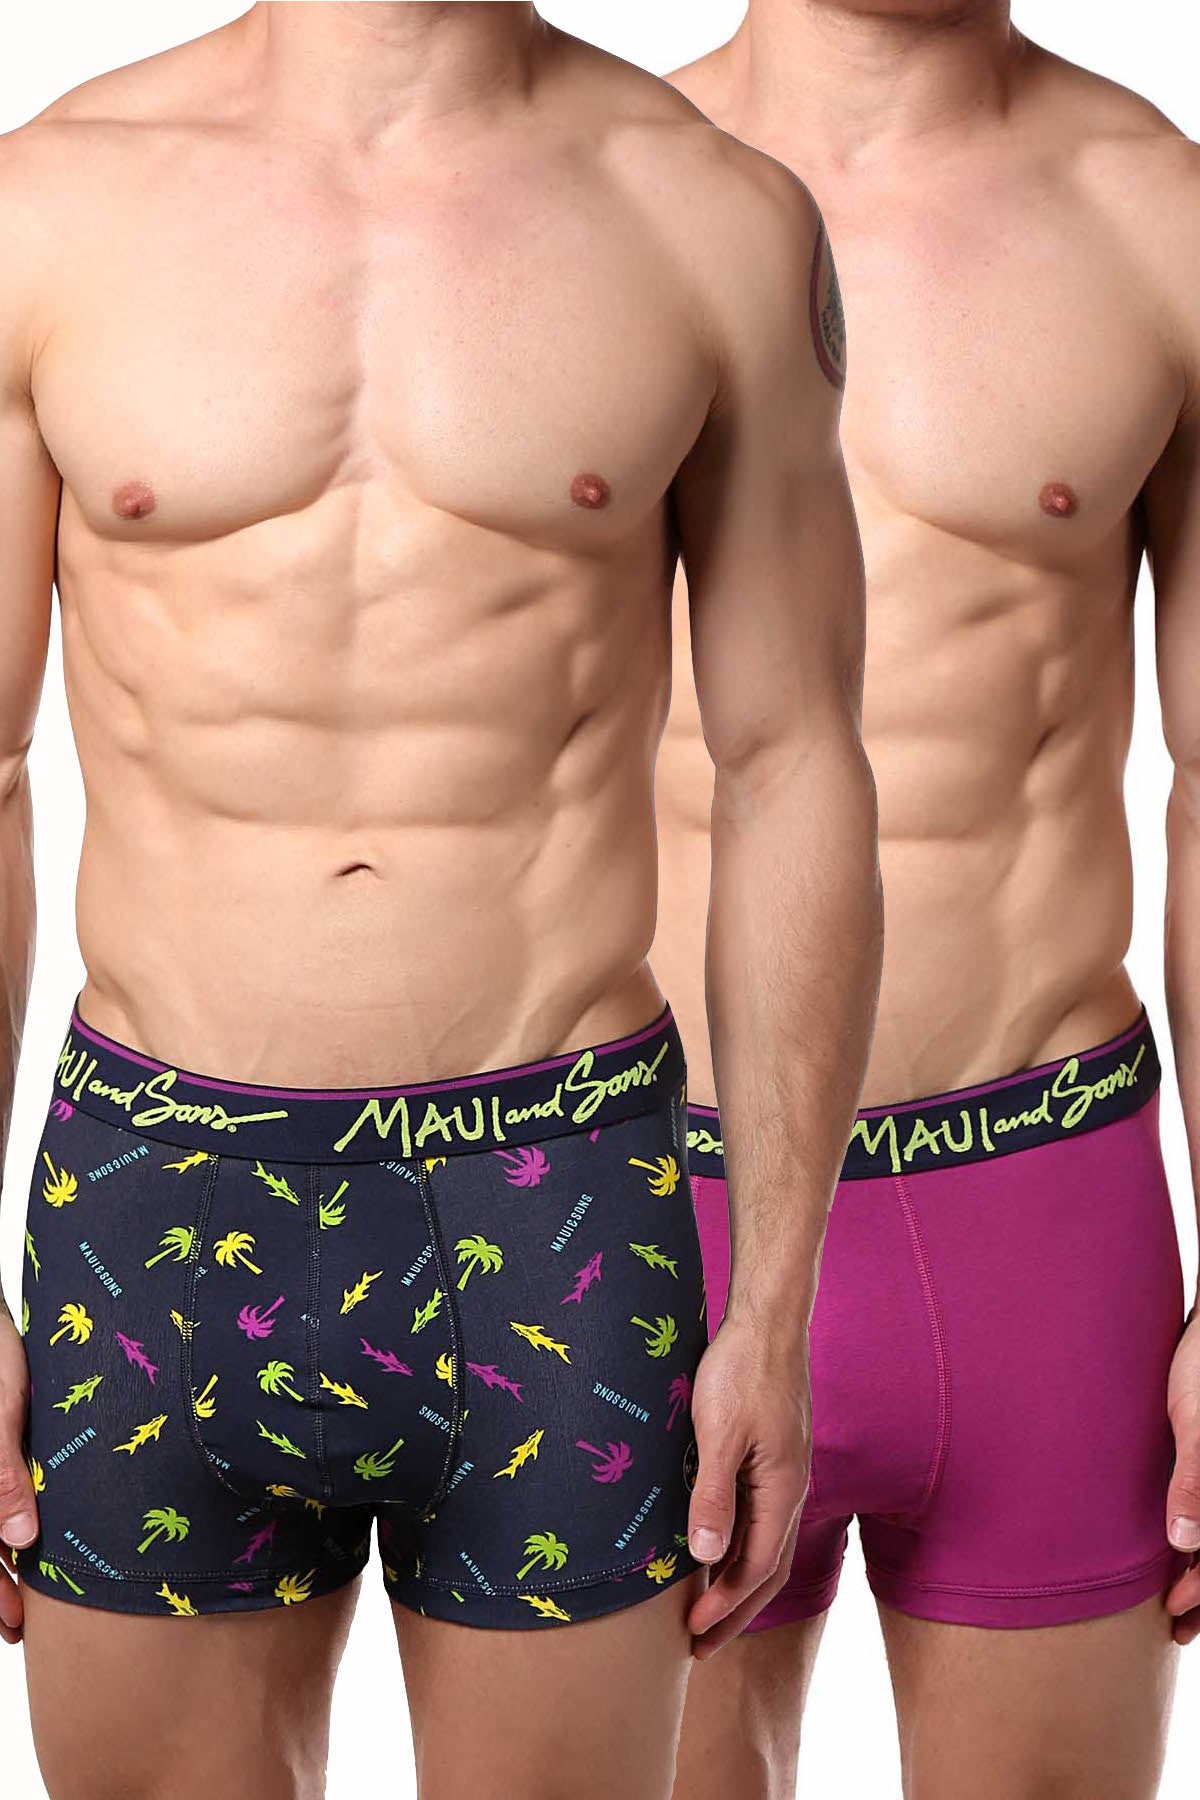 Maui and Sons Purple/Palm-Trees Cotton-Stretch Trunk 2-Pack